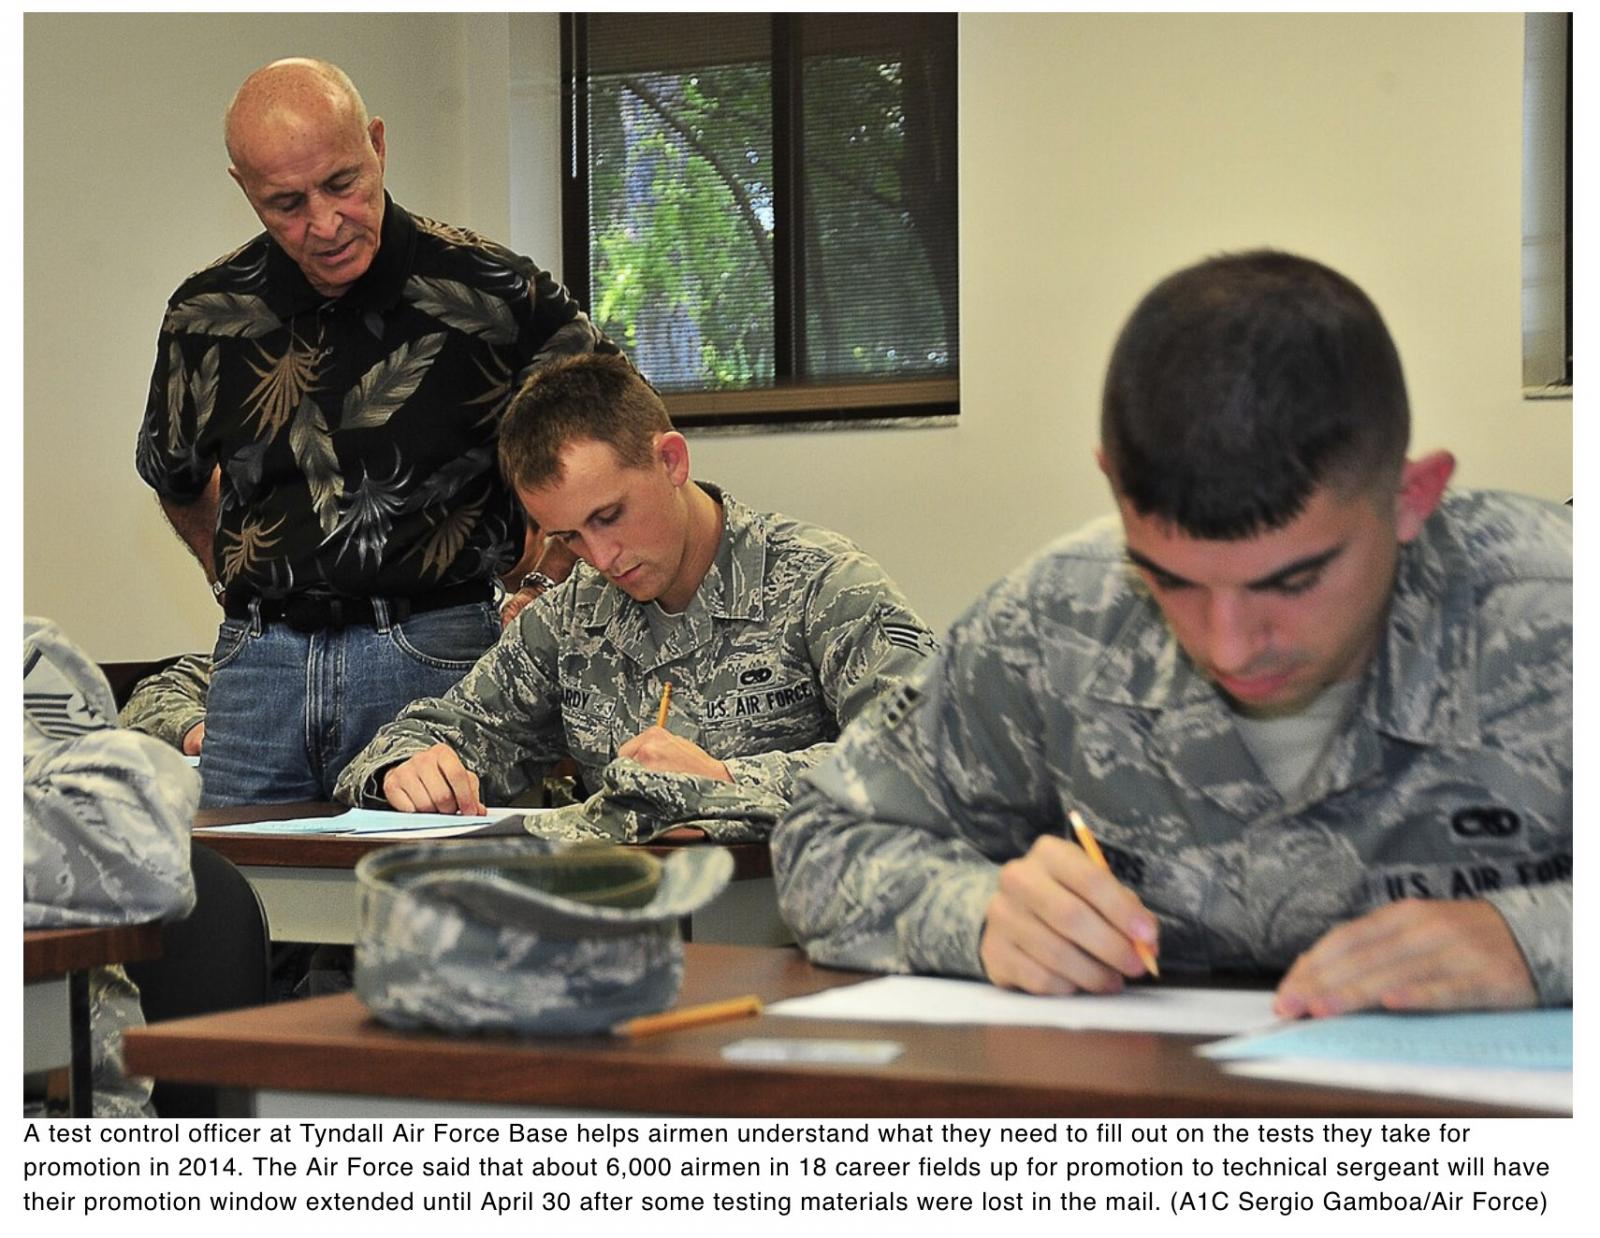  Tech sergeant promotion tests lost in mail; AFPC extends window for affected airmen